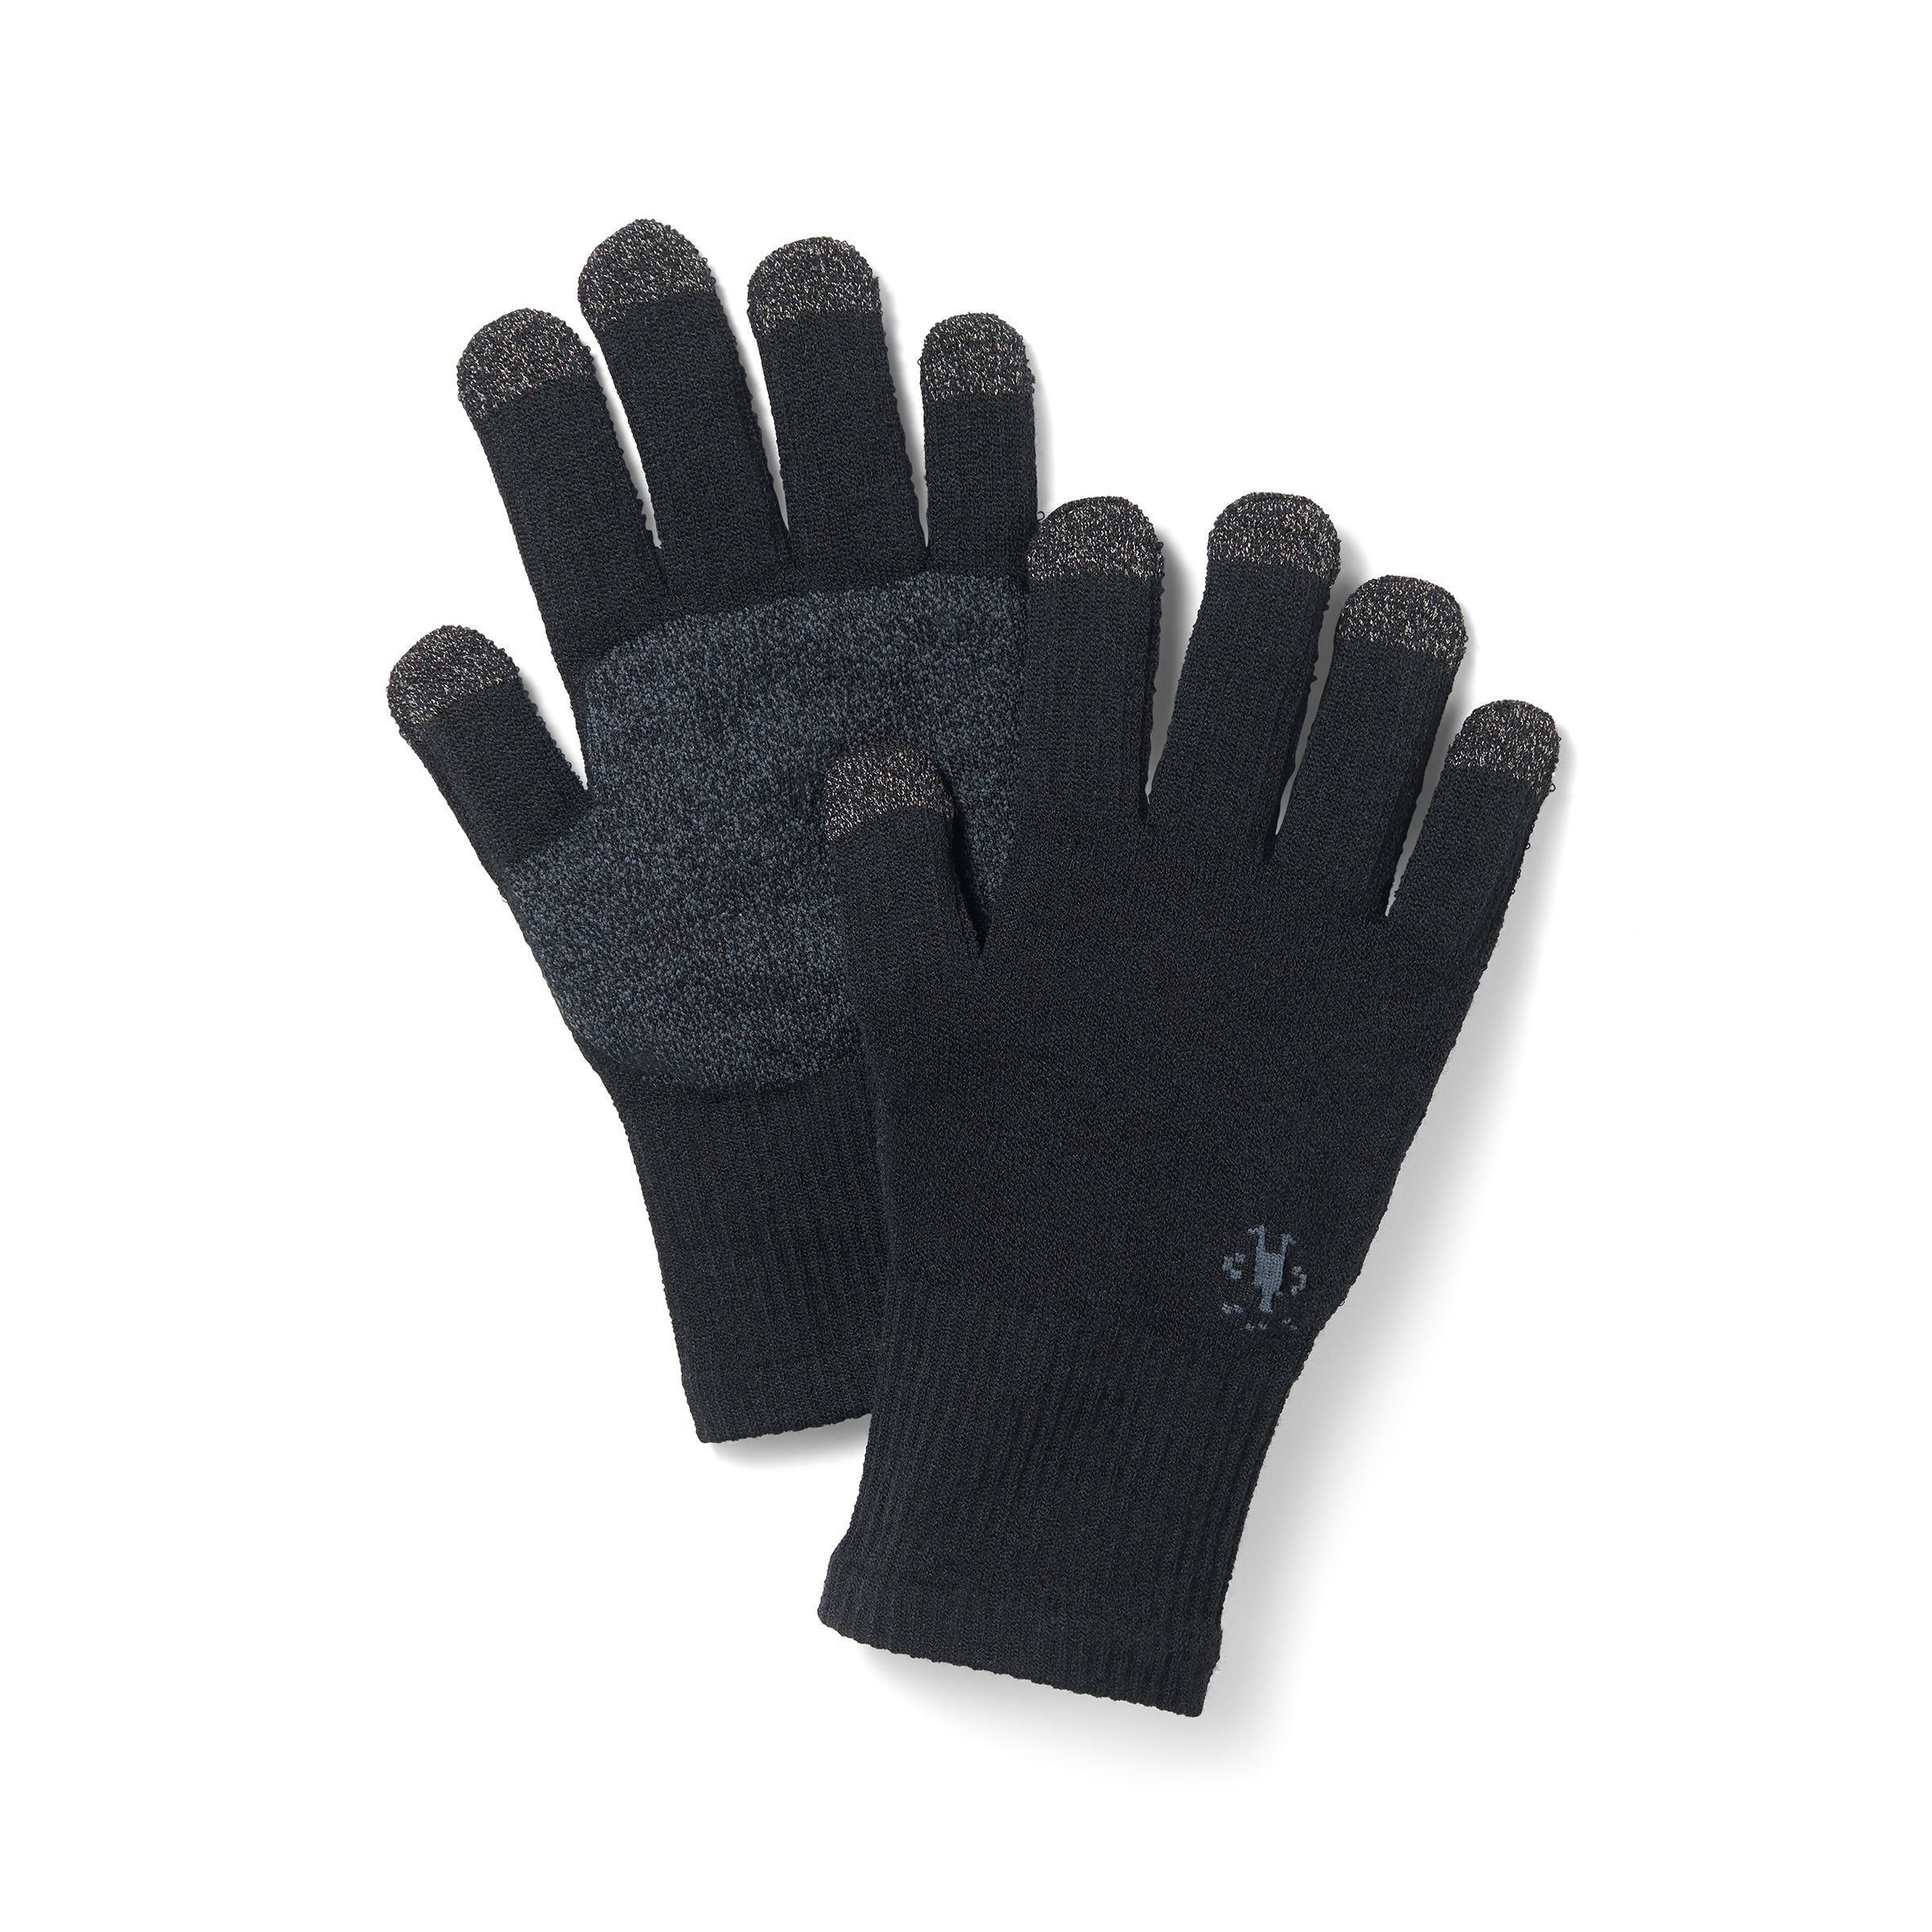 Mens Black Ultra Thermal Insulated Winter Heated Gloves 